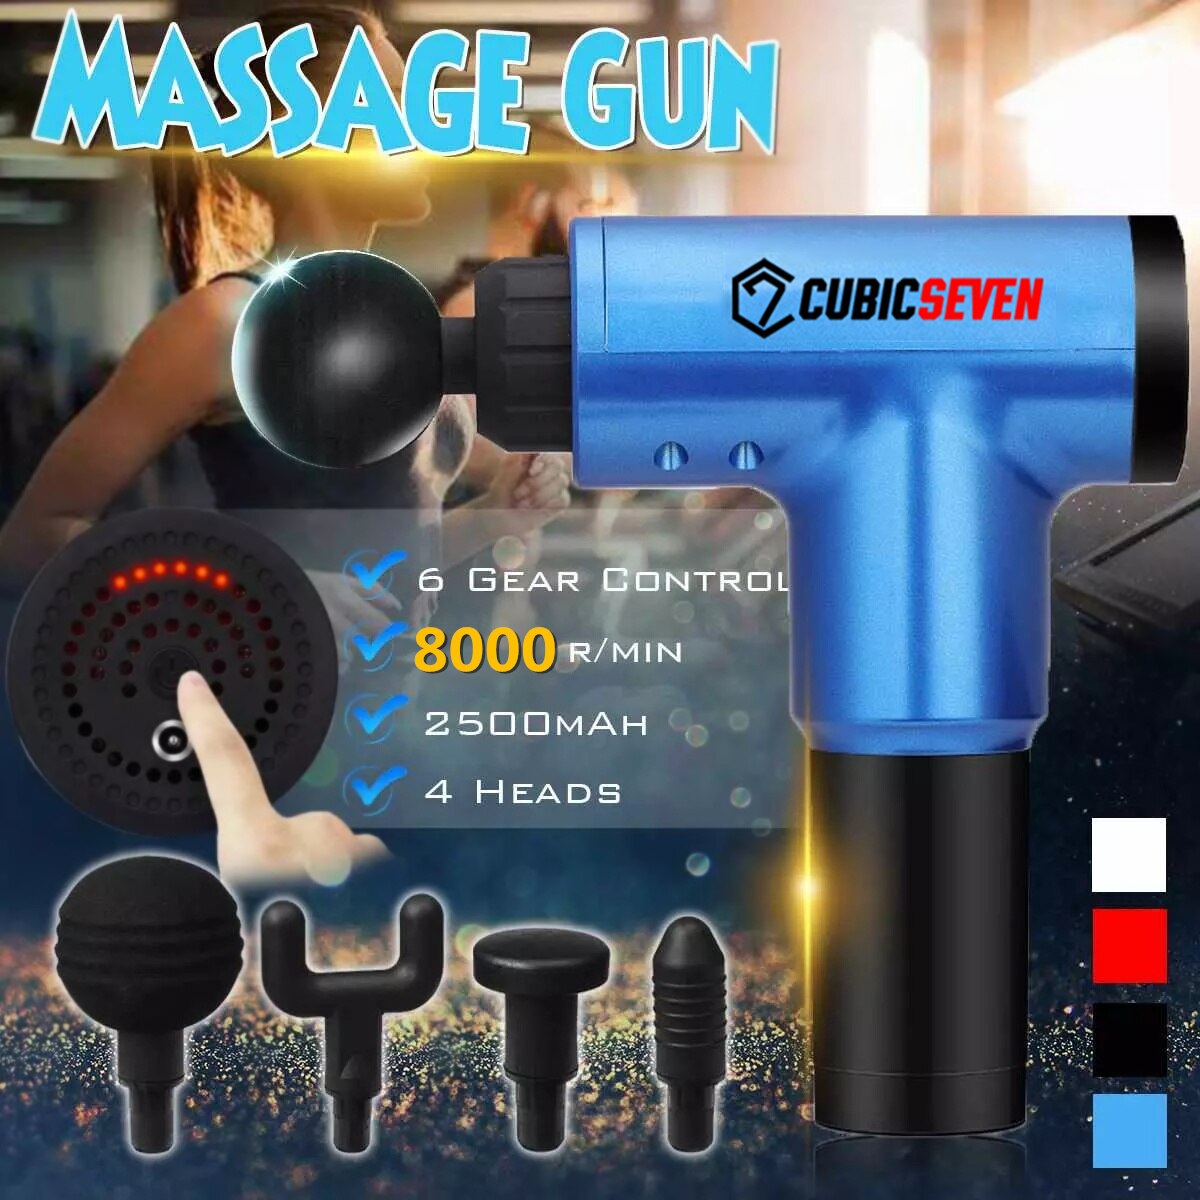 theragun massager after workout or work